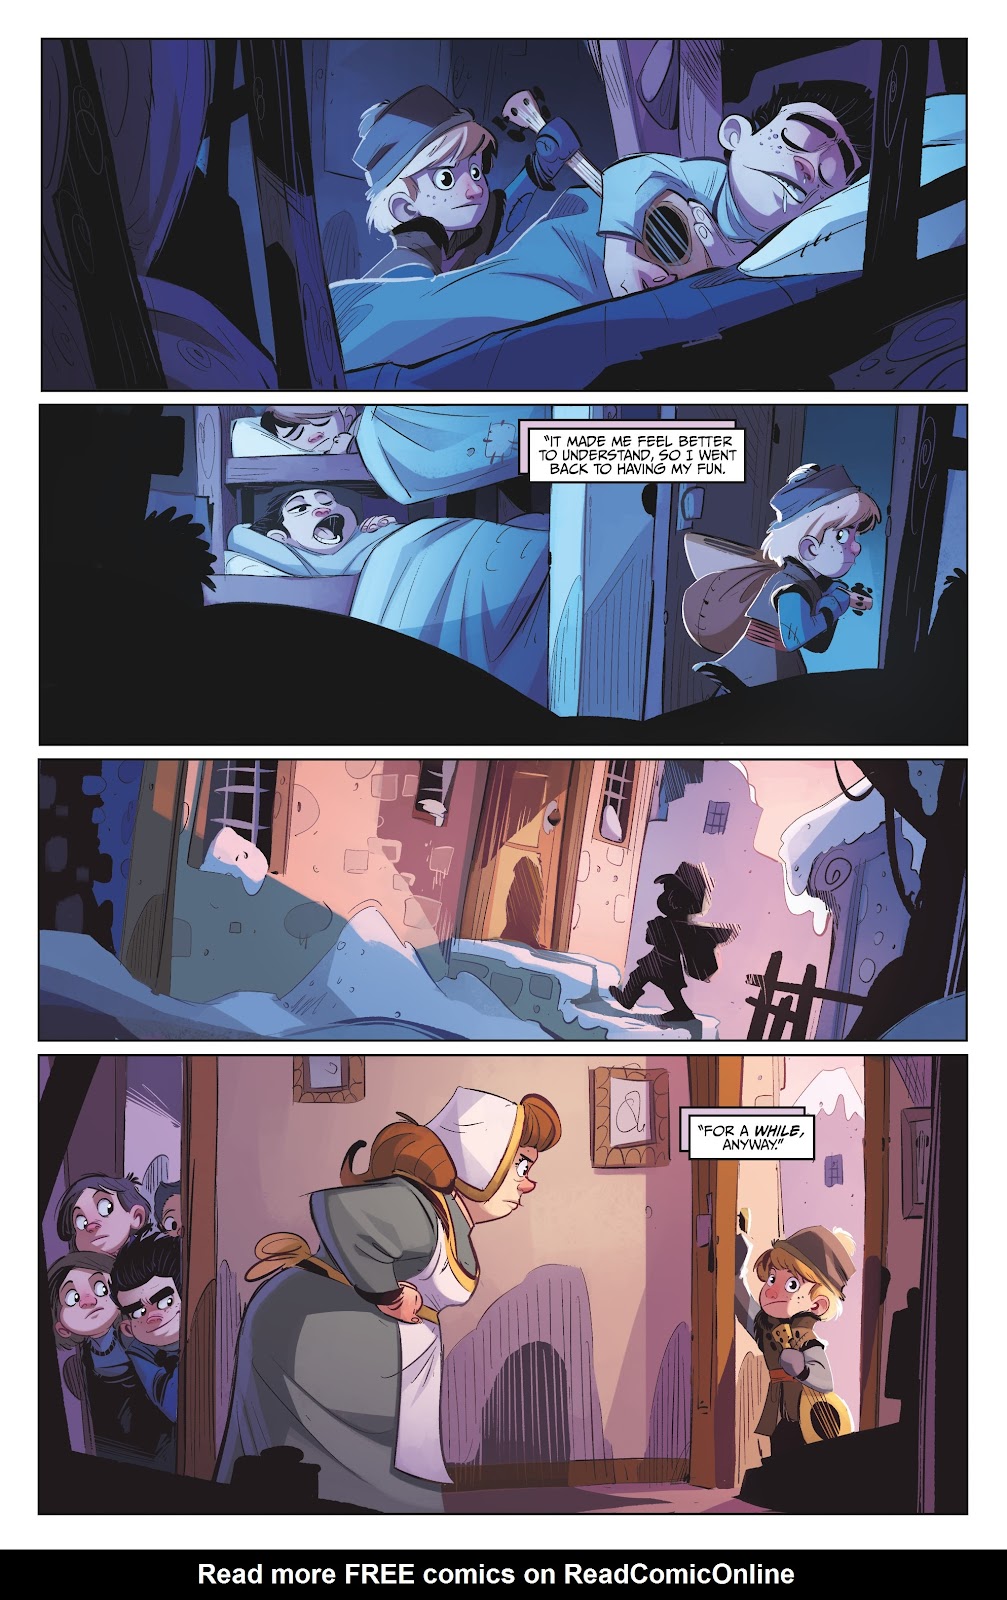 Disney Frozen: The Hero Within Full Page 11